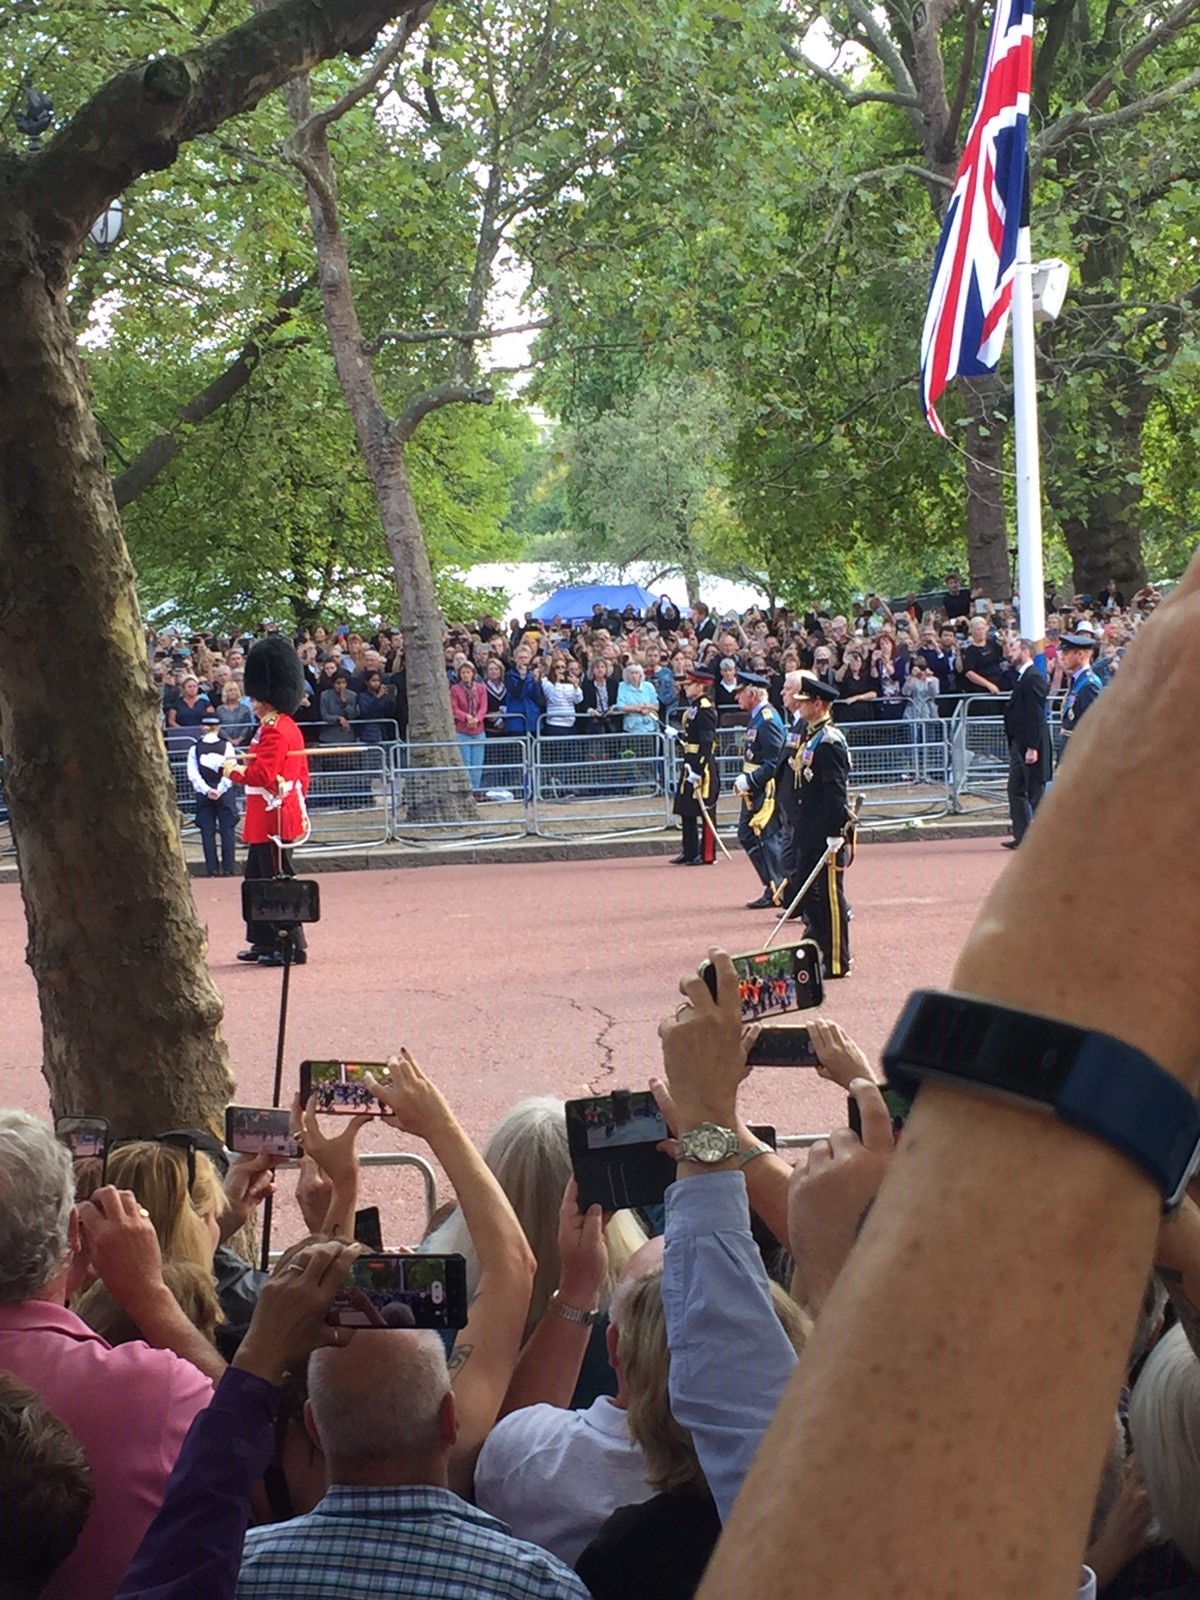 King Charles and other members of the Royal family follow HM QEII's coffin